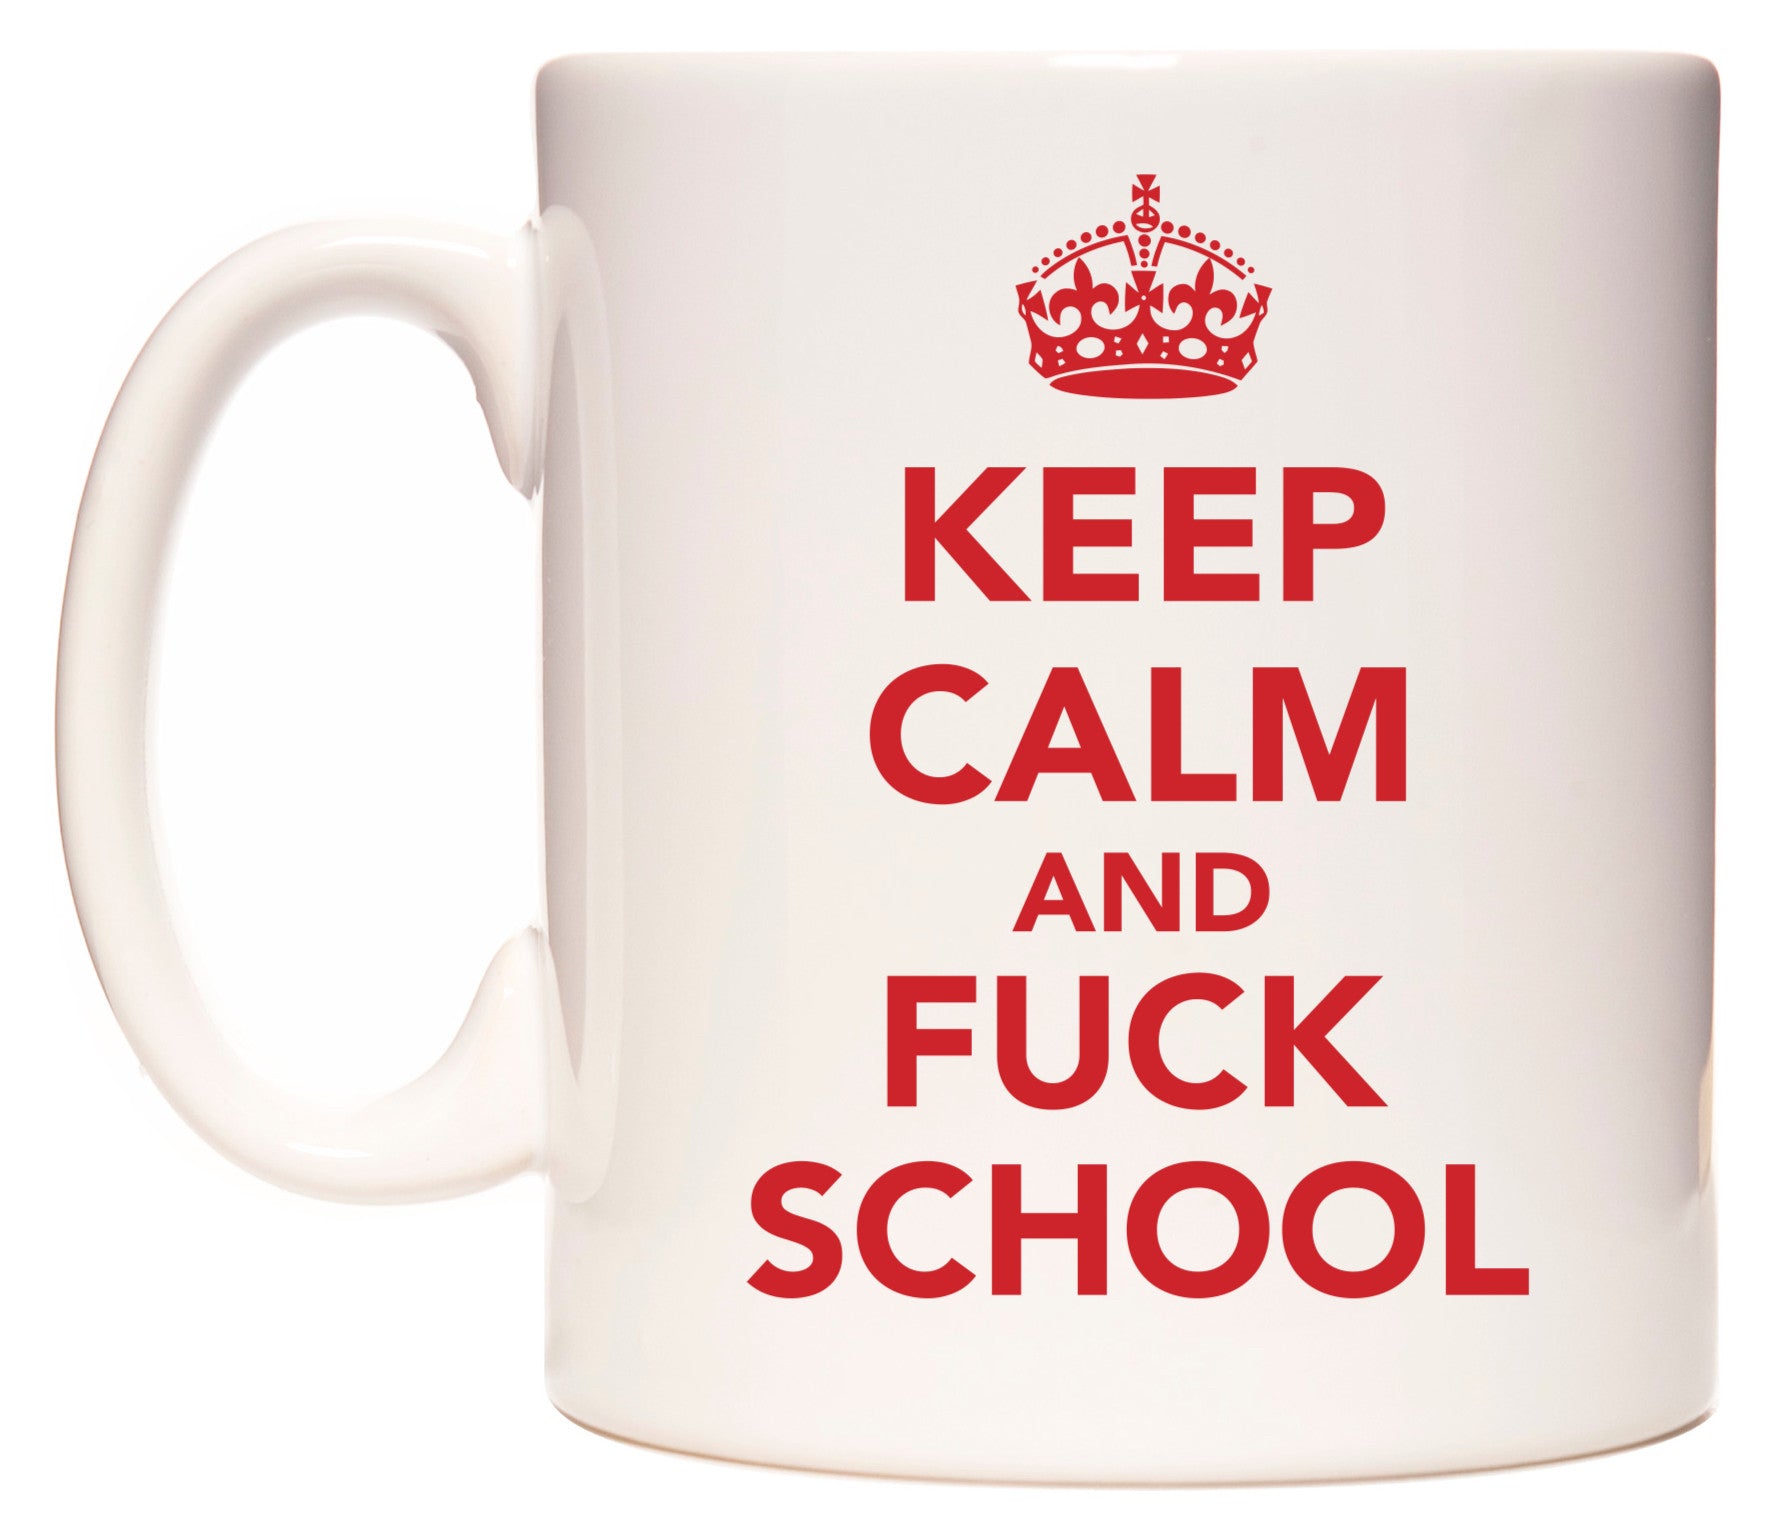 This mug features KEEP CALM AND F**K SCHOOL